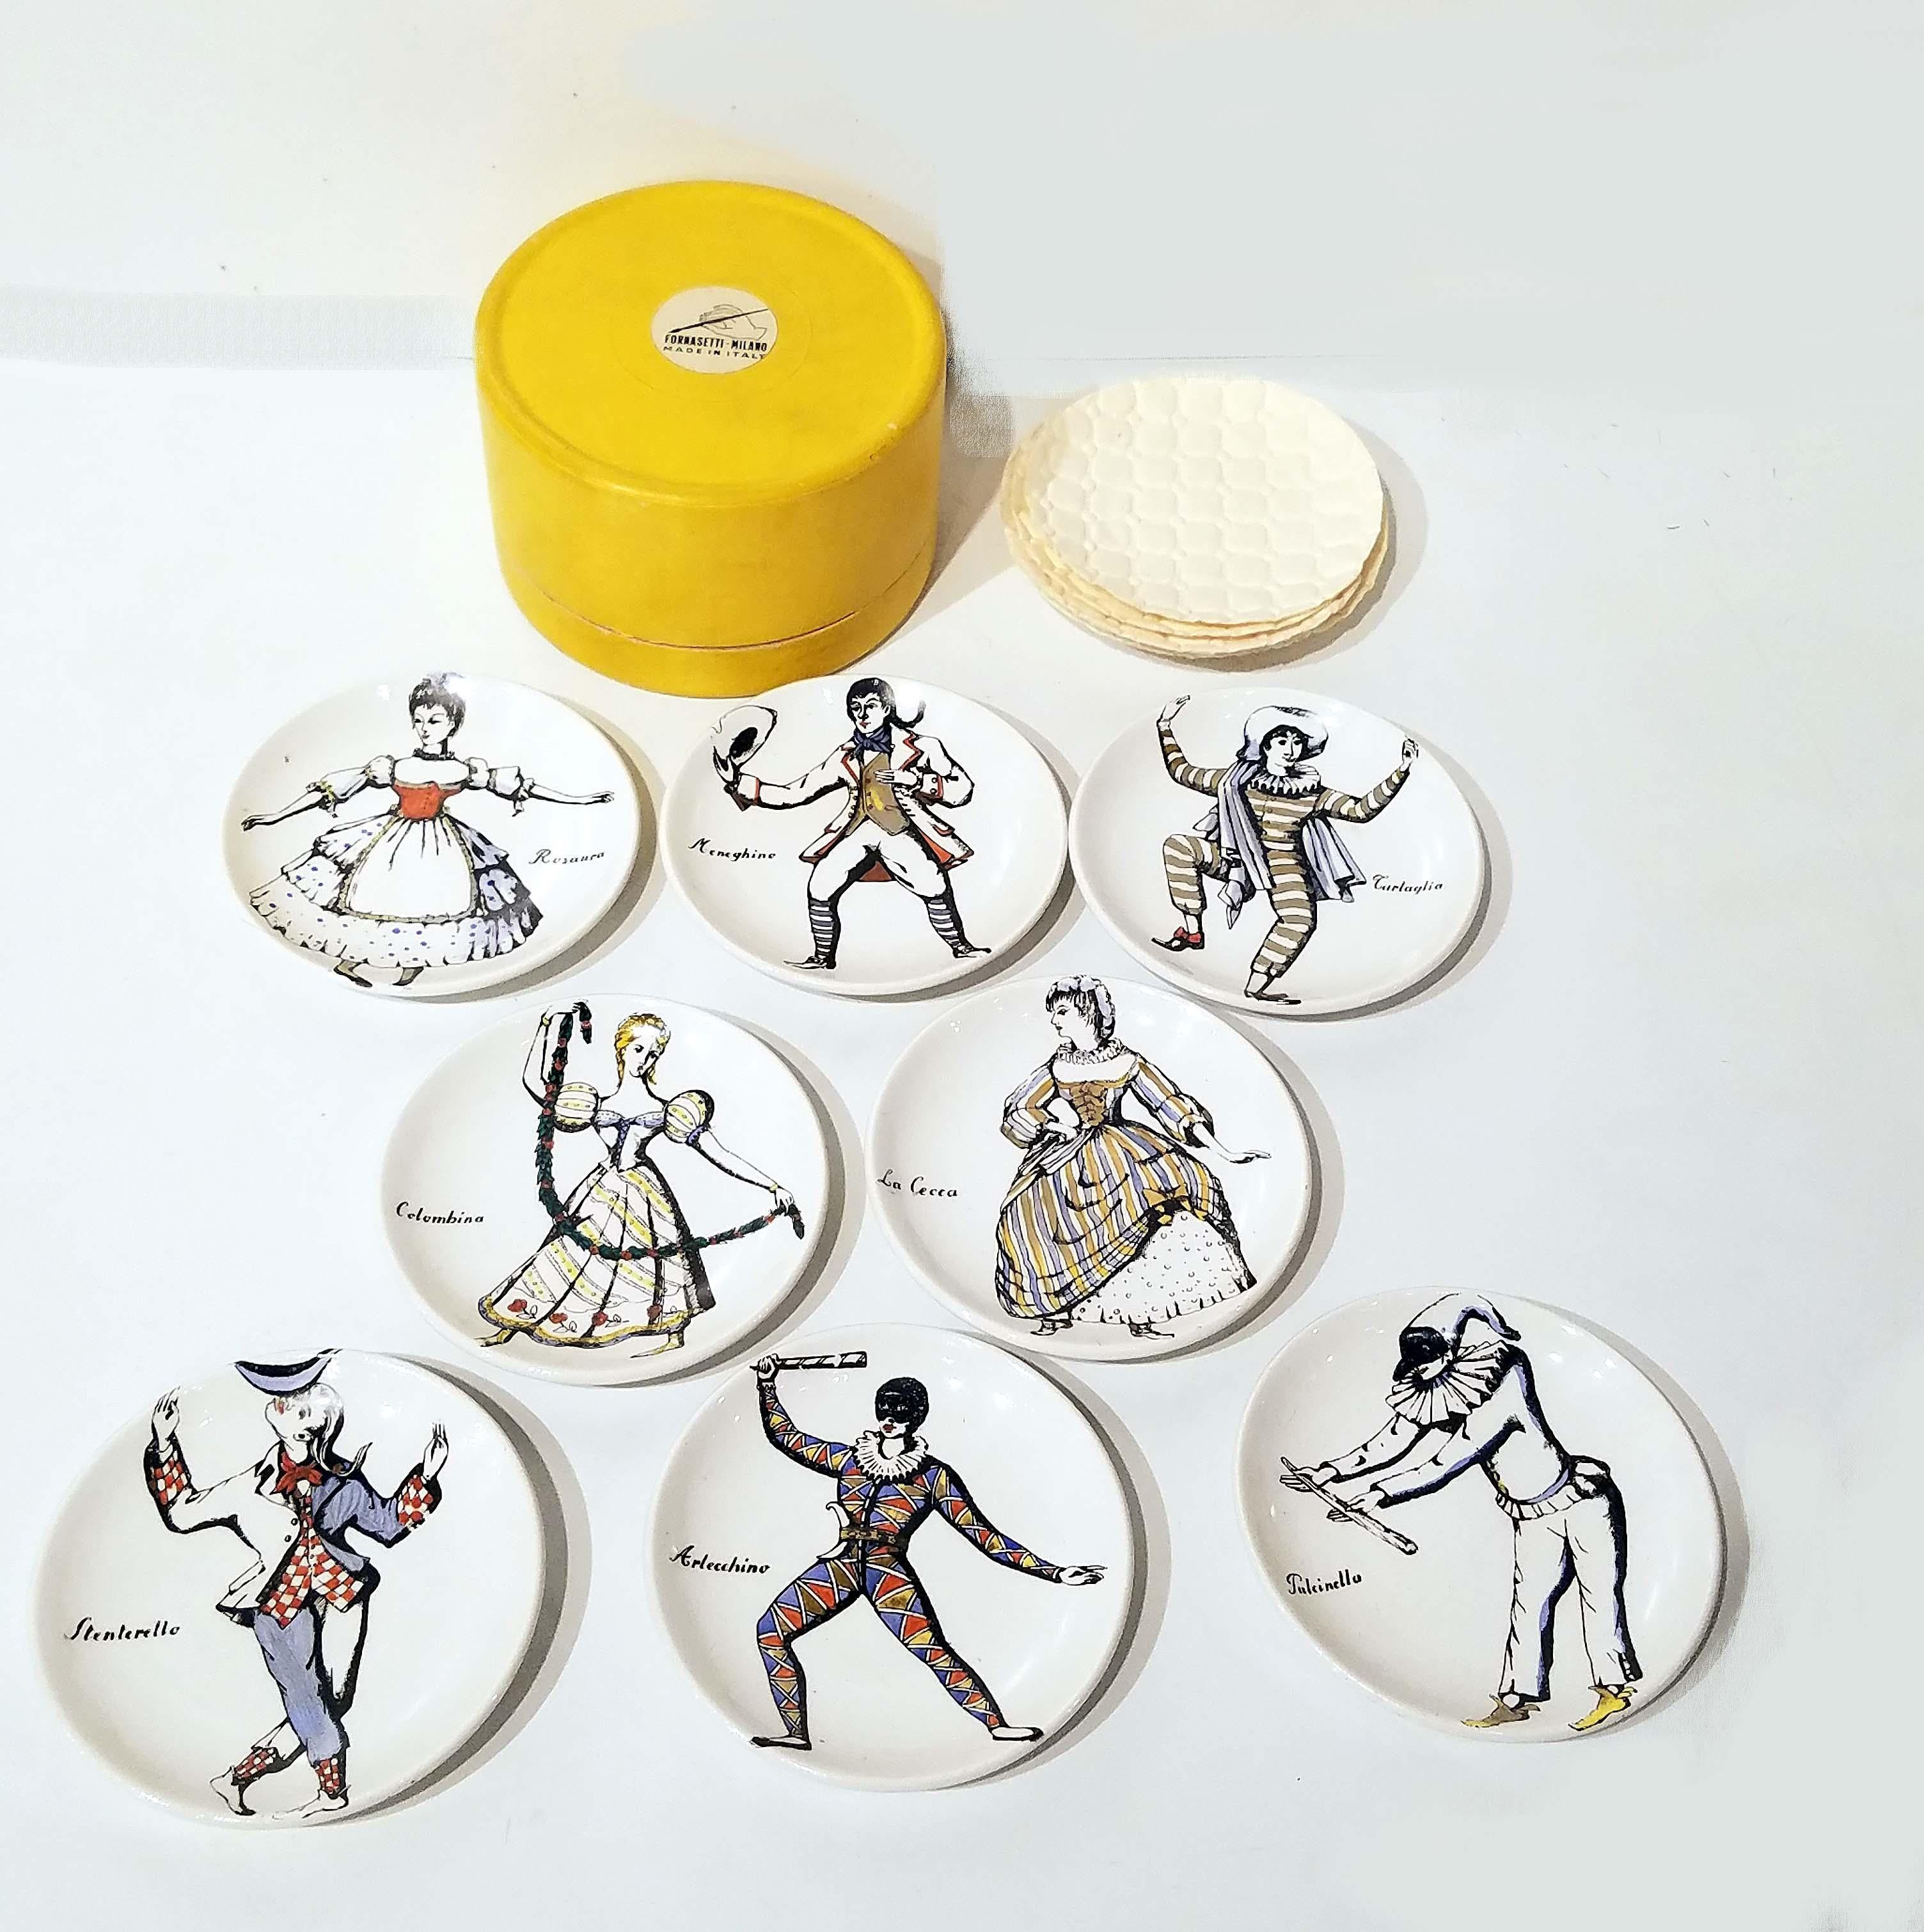 Piero Fornasetti (1913-1988)
A set of eight 'MASCHERE ITALIANE' coasters, 1950s
lithographically-decorated and hand painted porcelain, with original box
Measures: Each 3? in. diameter
each marked FORNASETTI MILANO MADE IN ITALY.
   